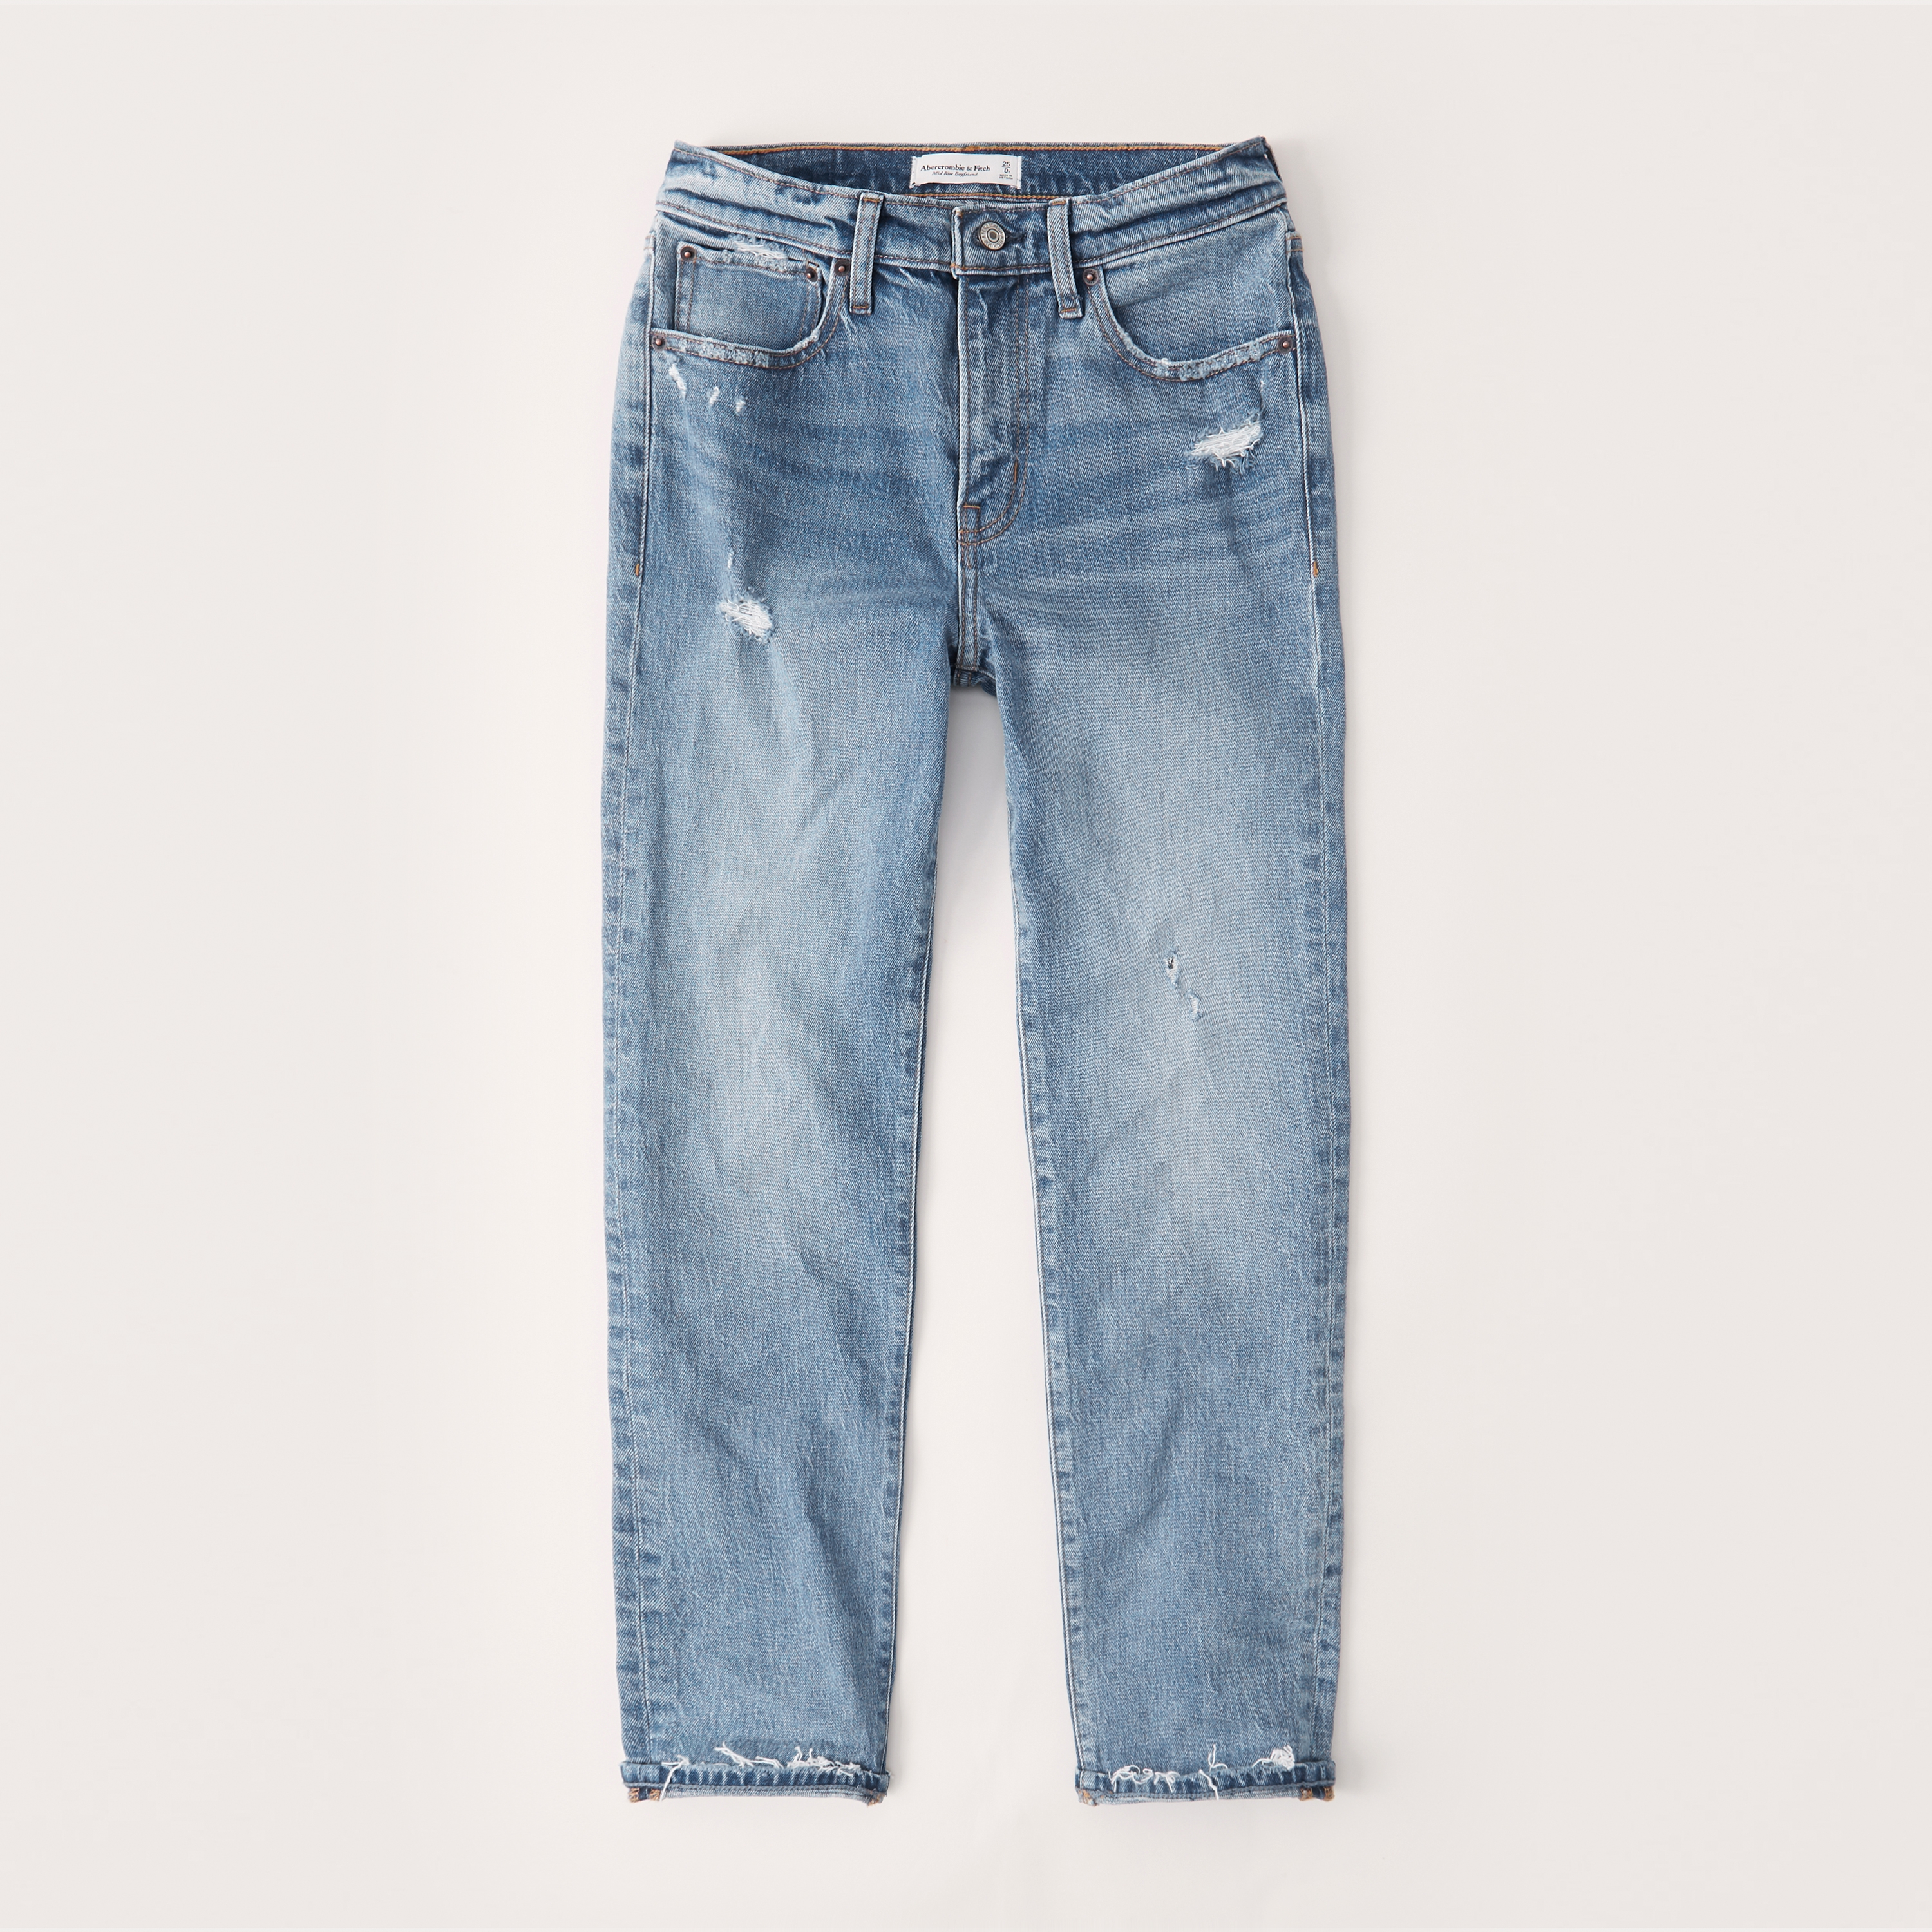 abercrombie clearance jeans